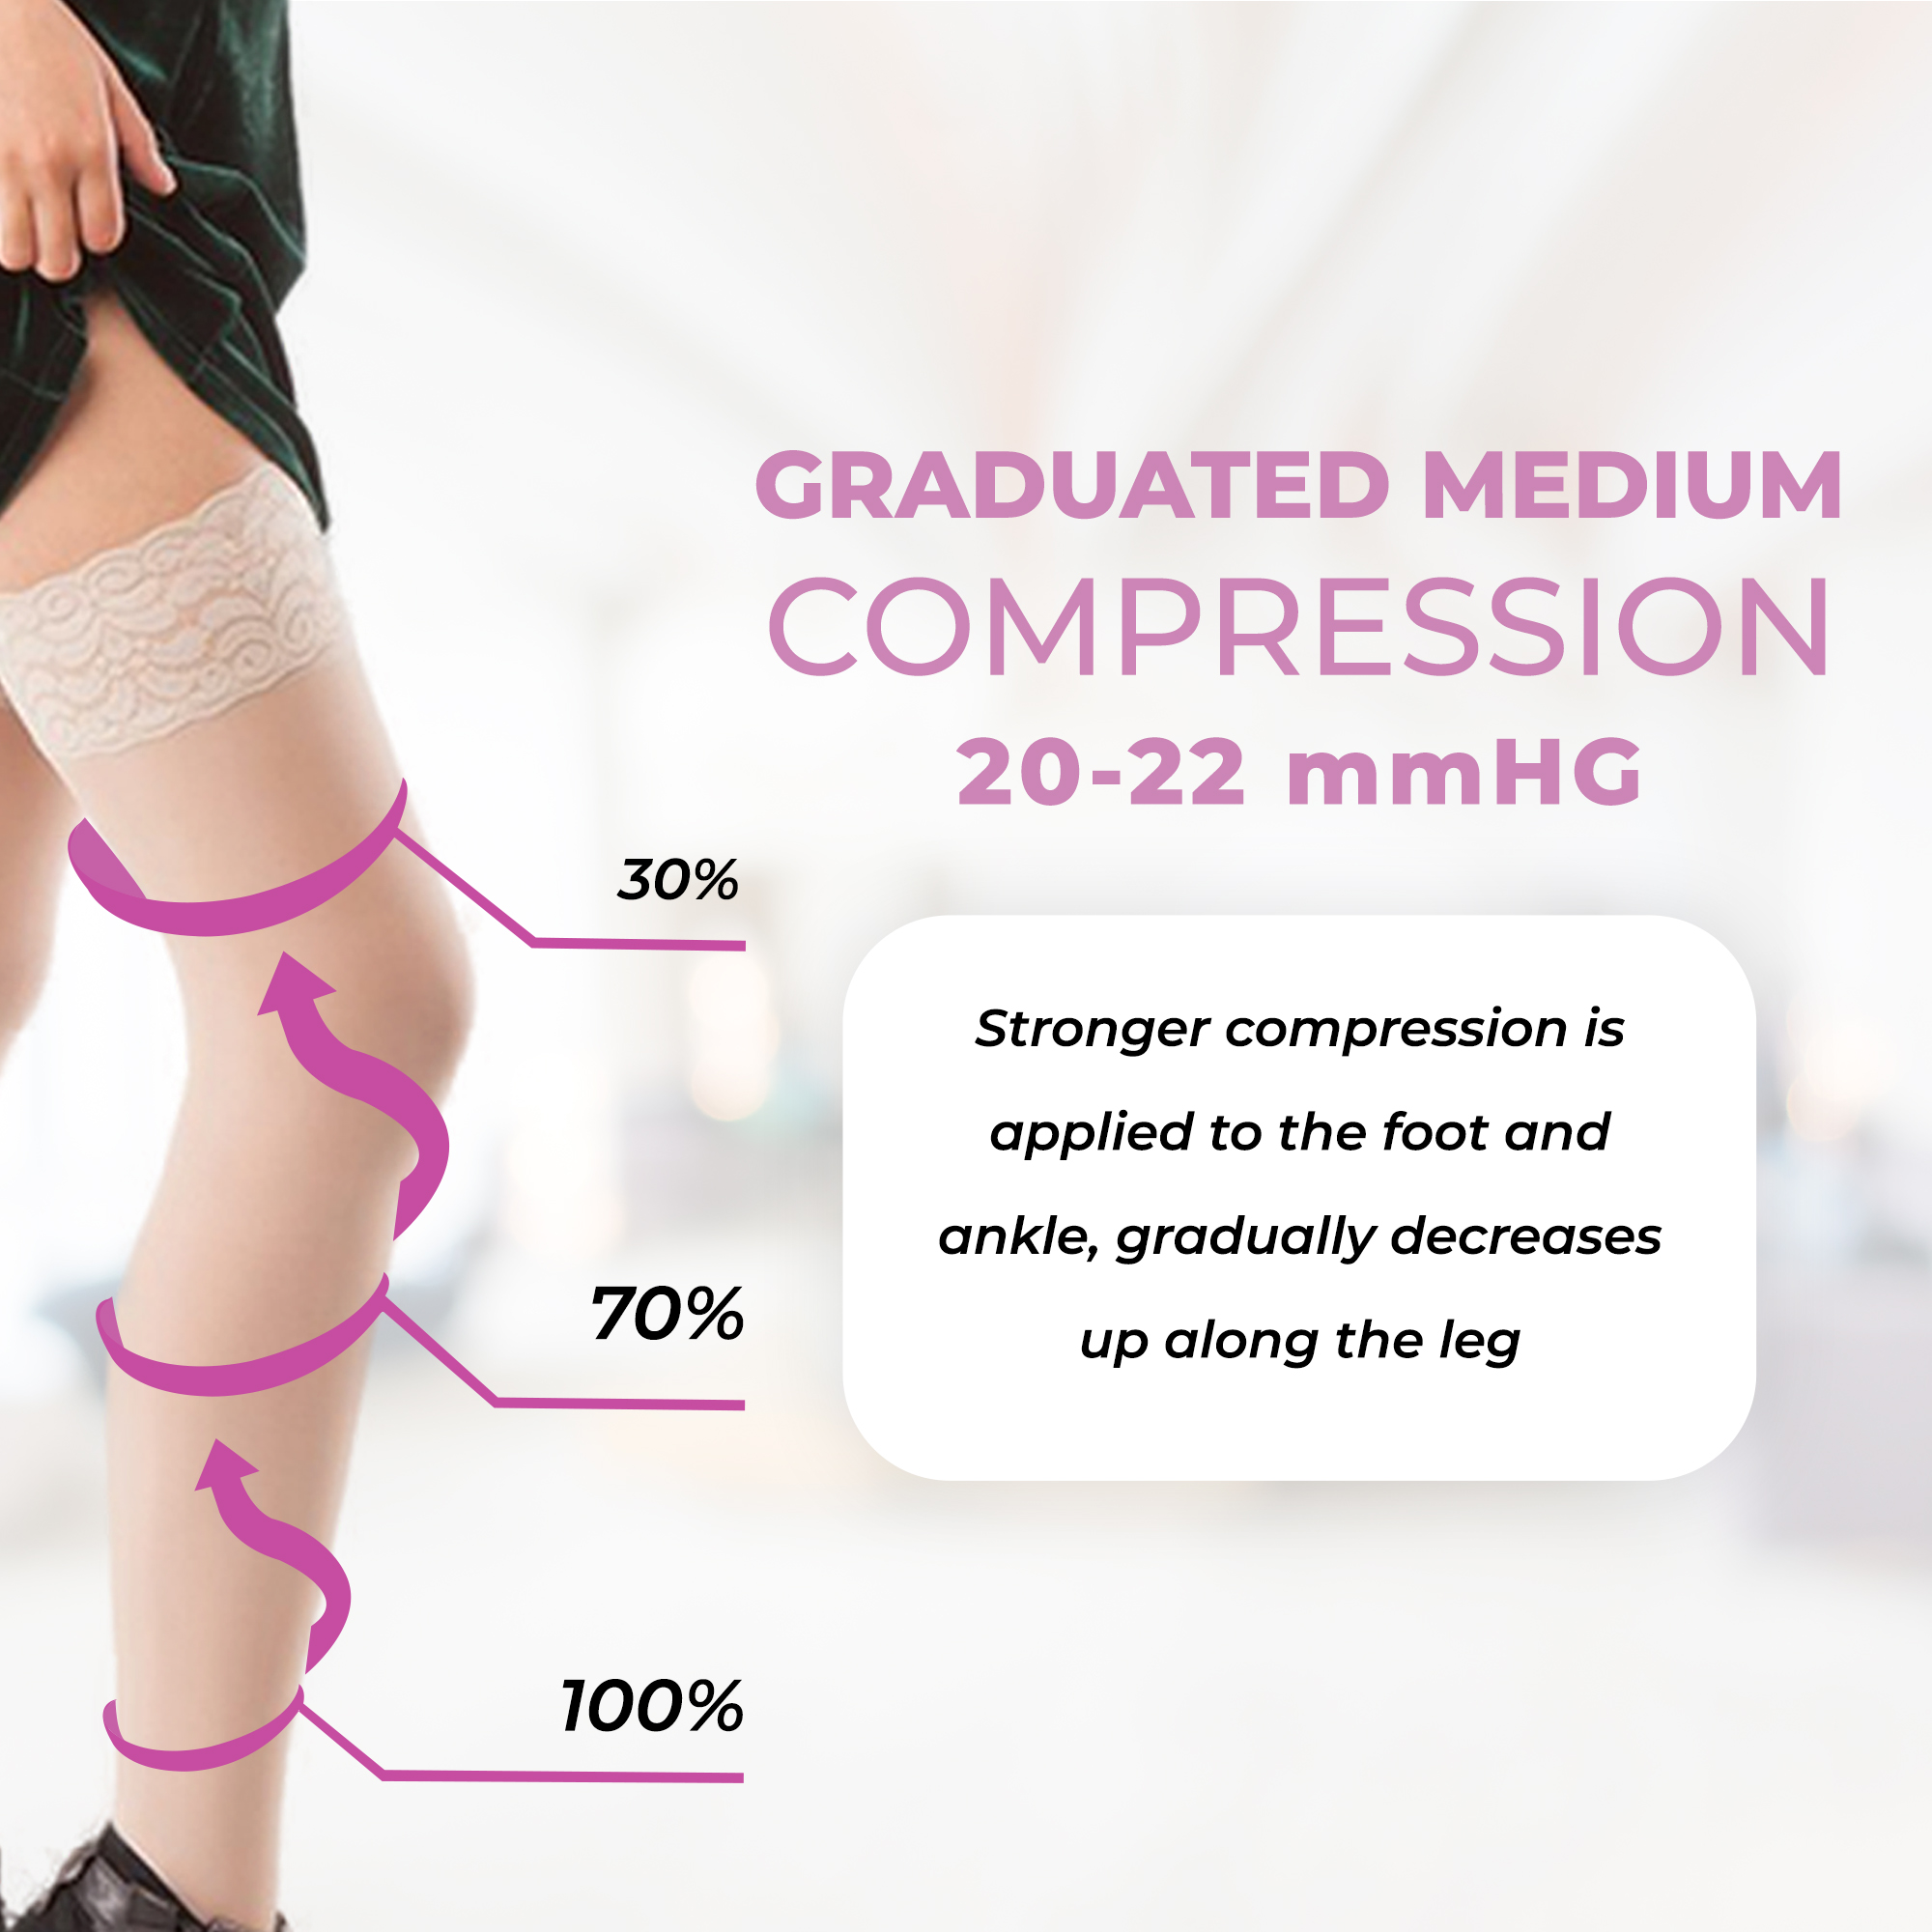 Ita-Med Sheer Thigh High Medium Graduated Compression Stockings for Women 20-22 mmHg: H-40 - image 3 of 7